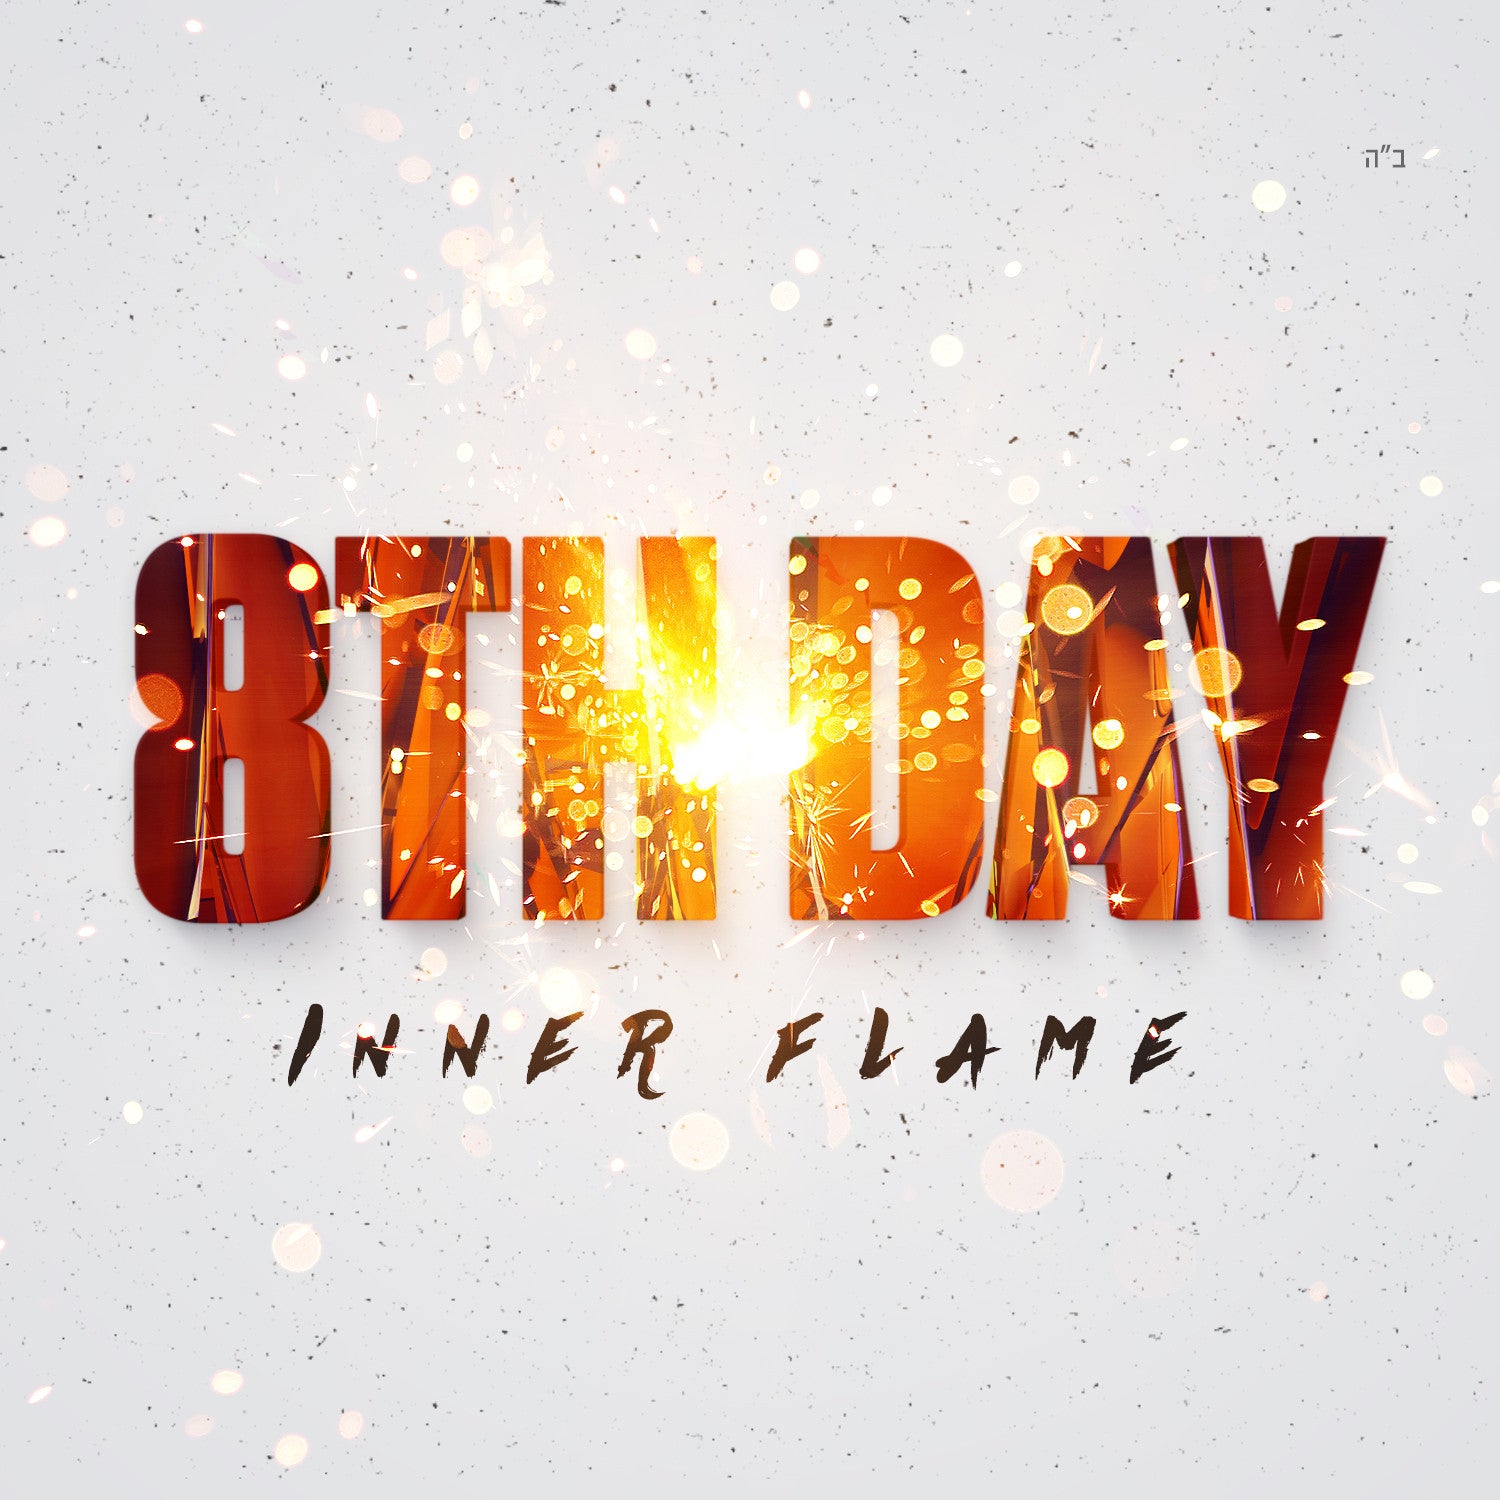 8th Day - Inner Flame